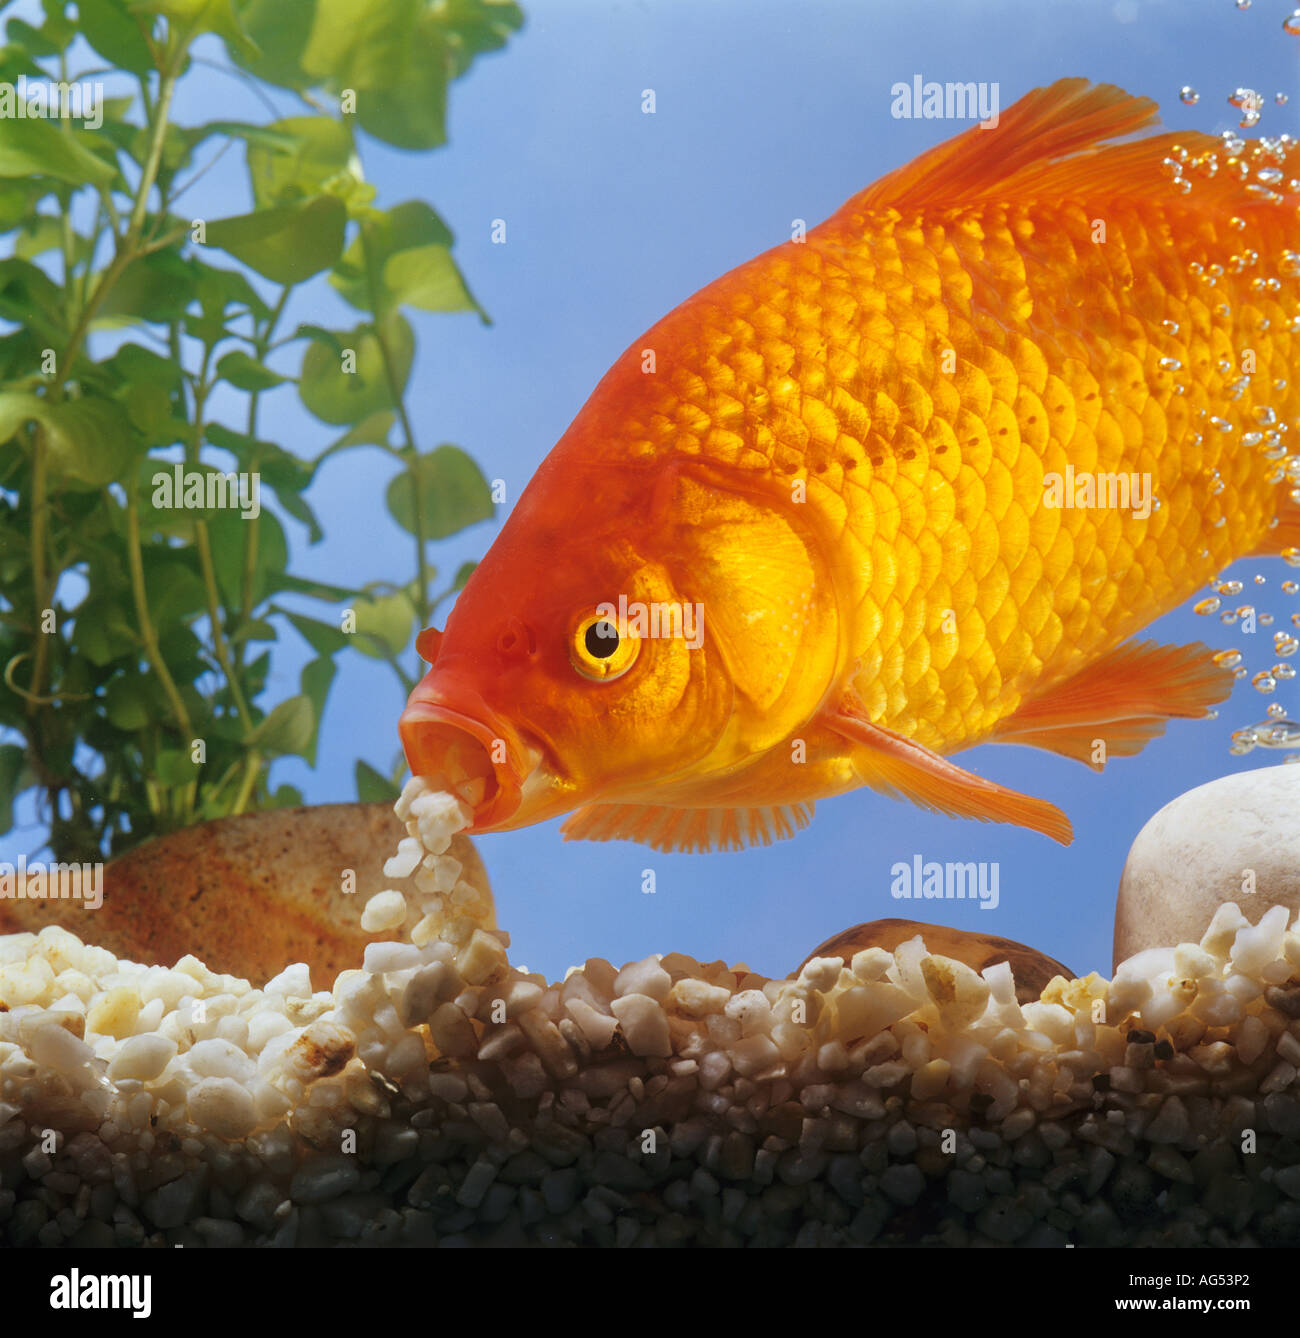 goldfish with pebbles in mouth Carassius auratus Stock Photo